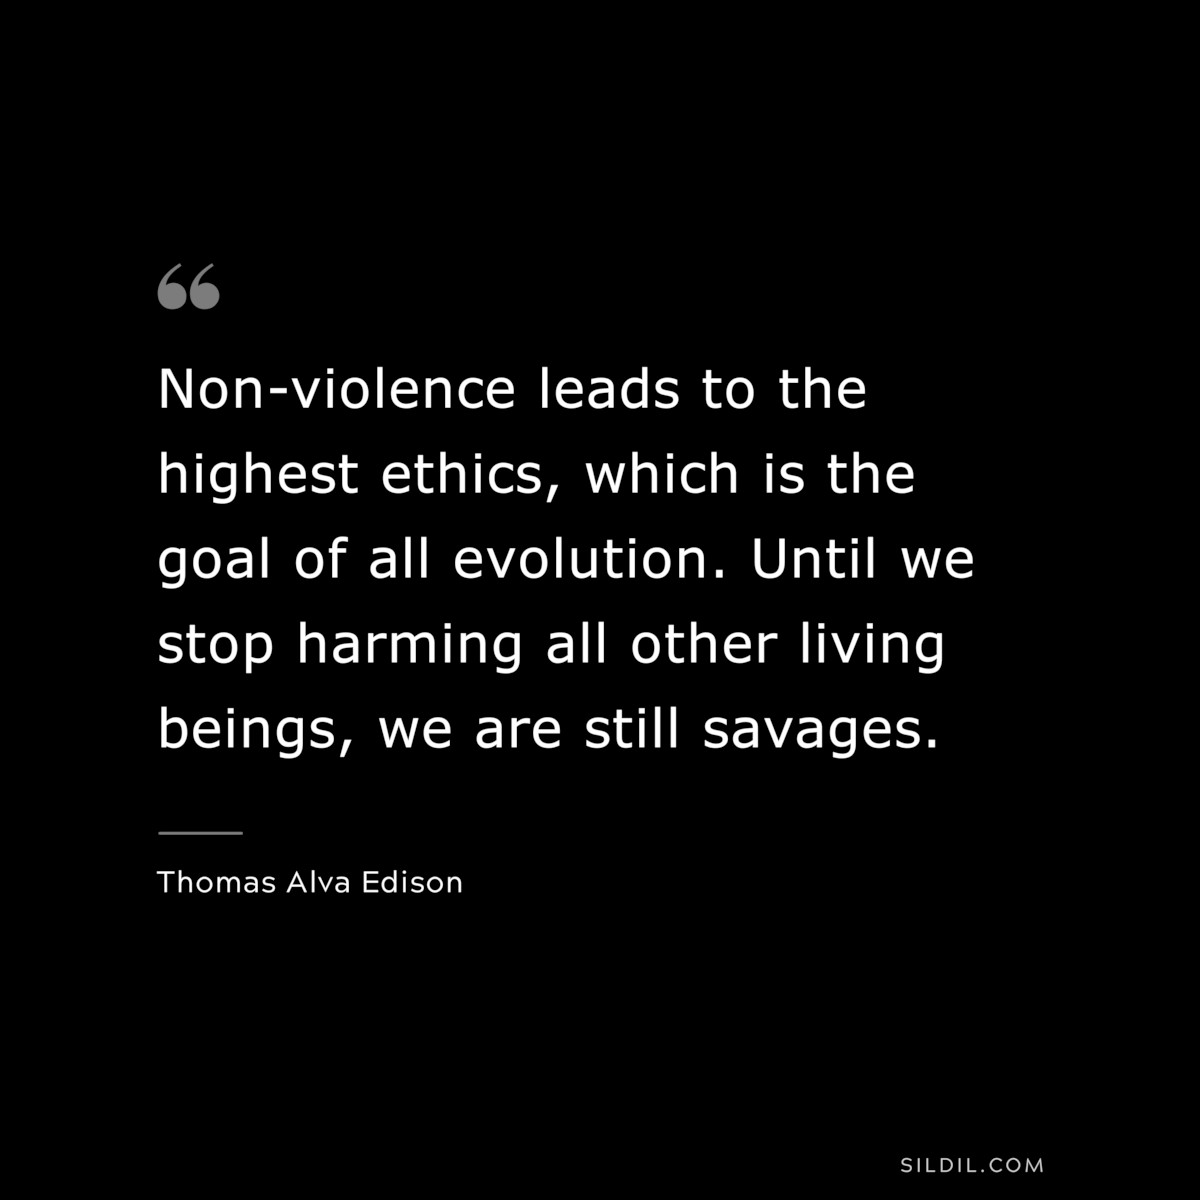 Non-violence leads to the highest ethics, which is the goal of all evolution. Until we stop harming all other living beings, we are still savages. ― Thomas Alva Edison